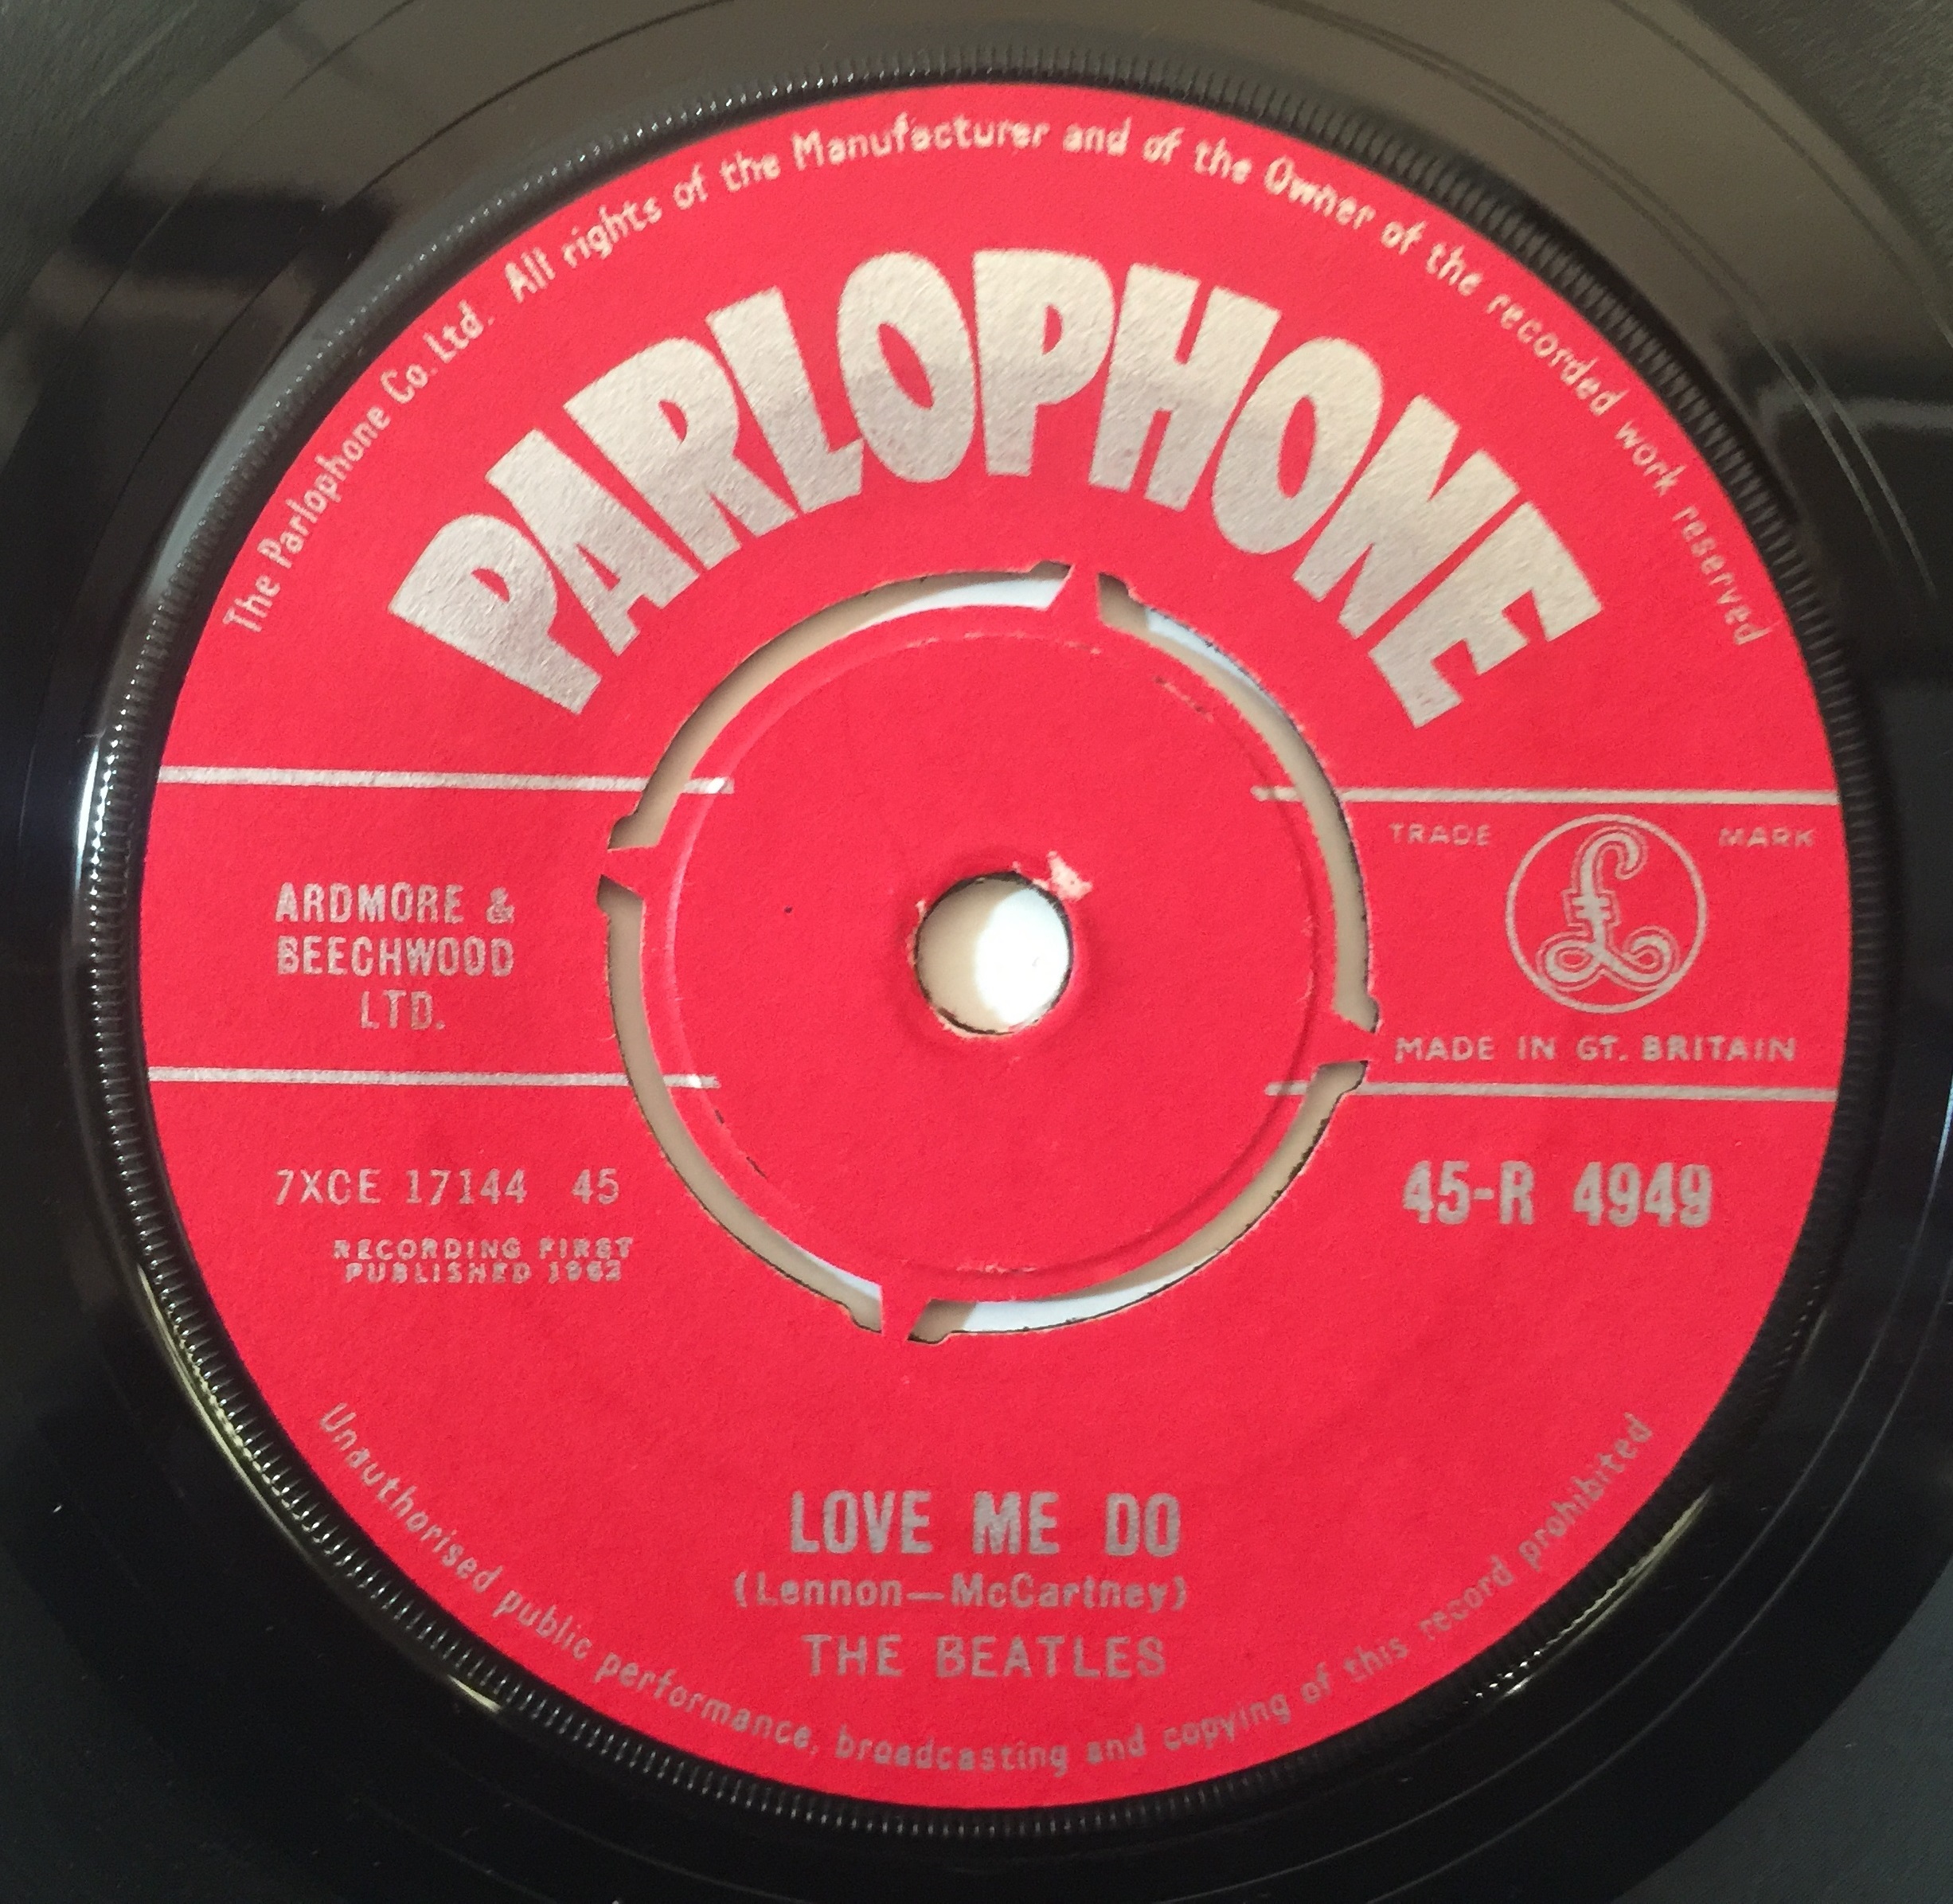 Lot 4 - The Beatles - Love Me Do 7